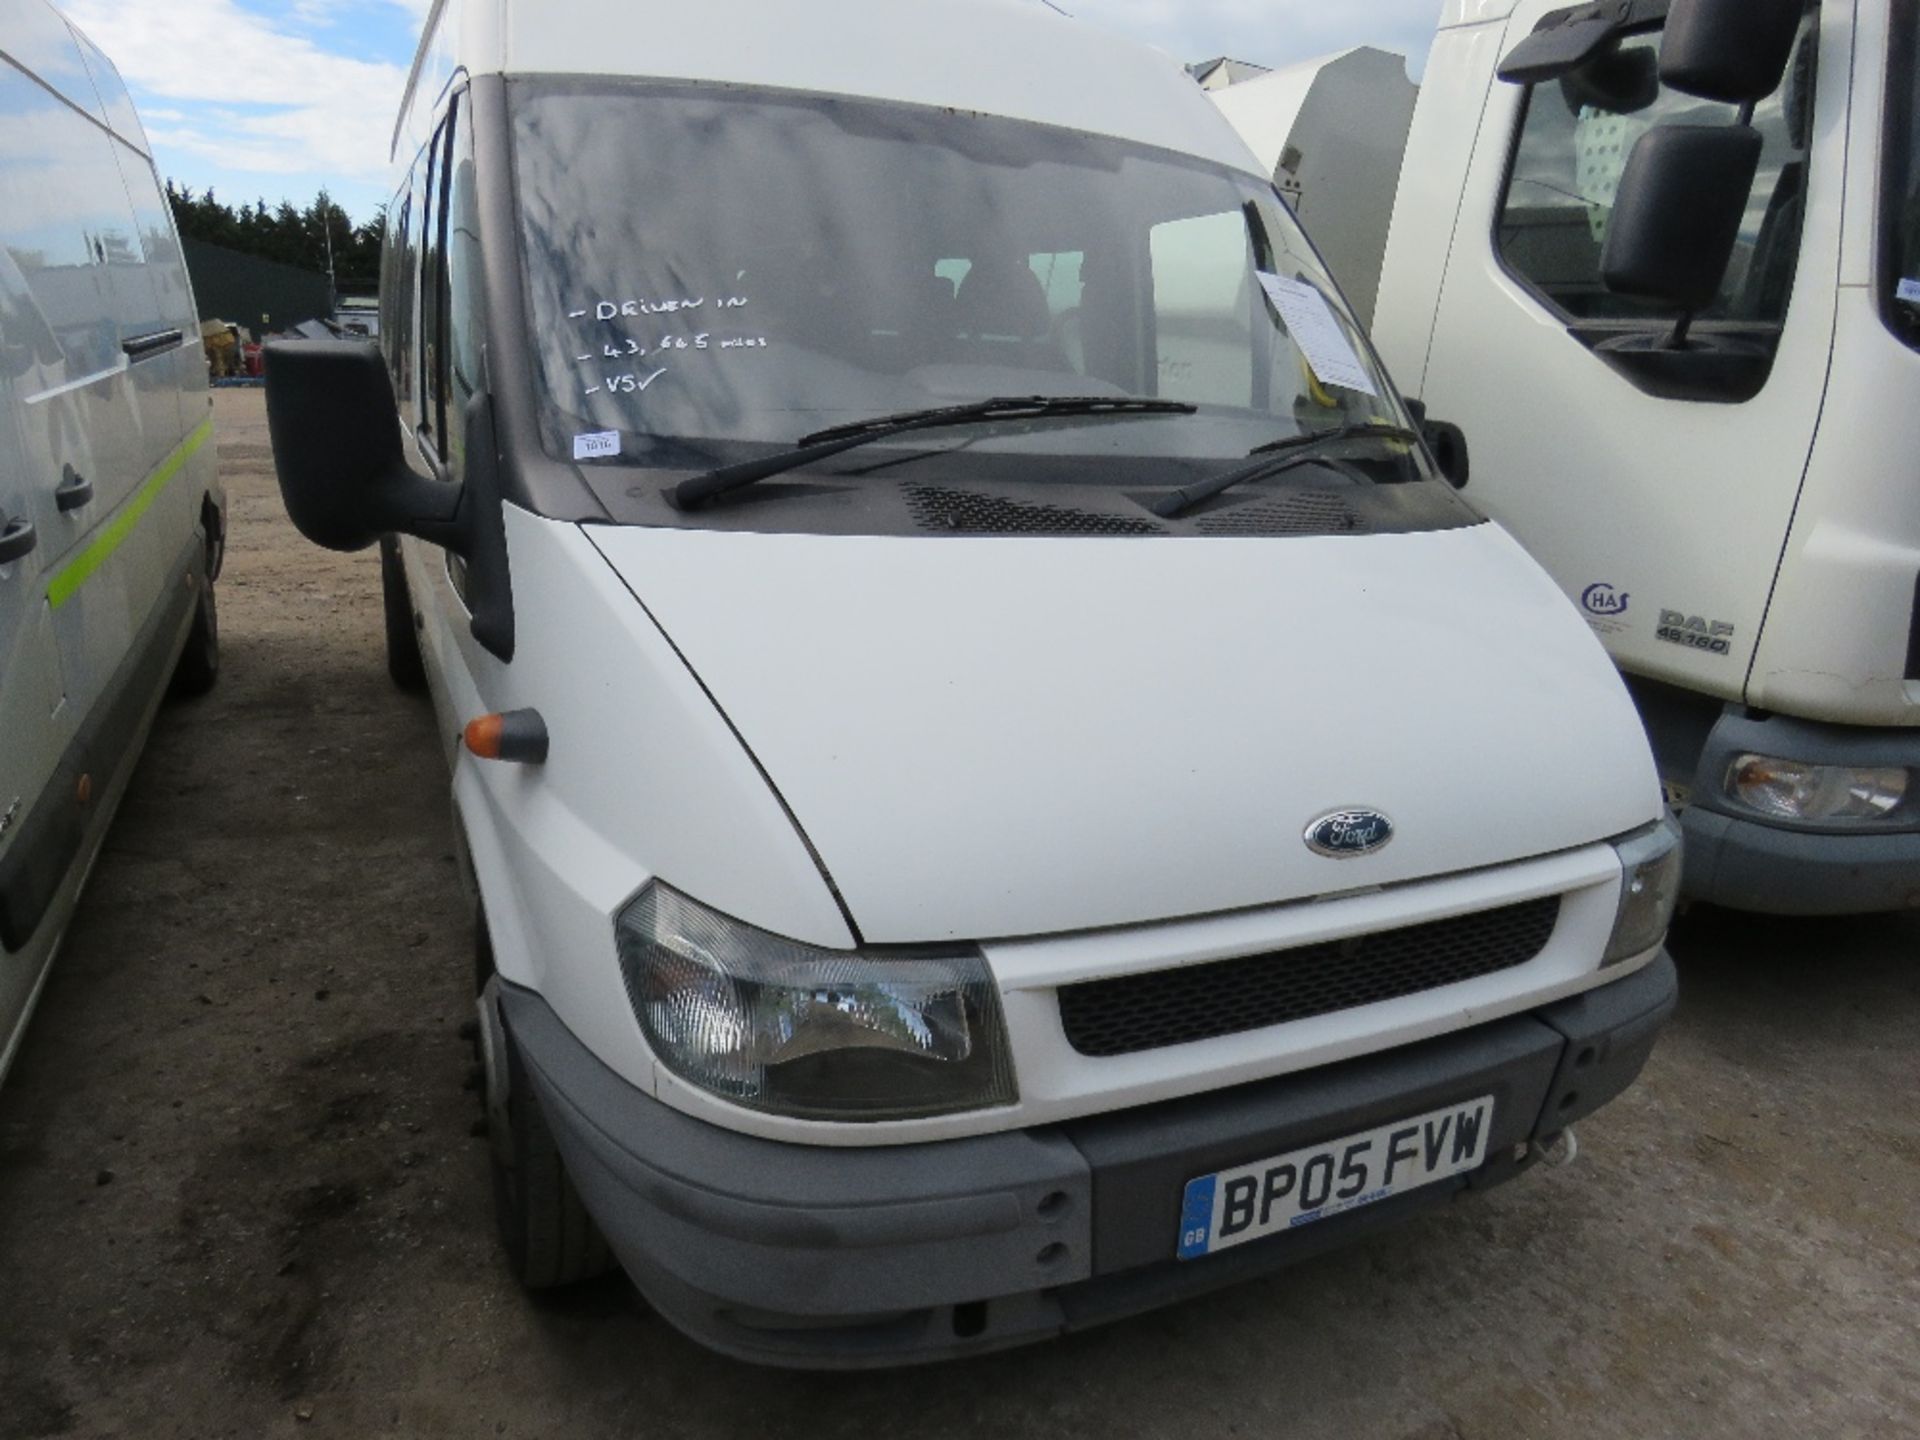 FORD TRANSIT 17 SEATER MINIBUS, REG: BP05 FVW 43,645 REC MILES?? WITH V5 WHEN TESTED WAS SEEN TO